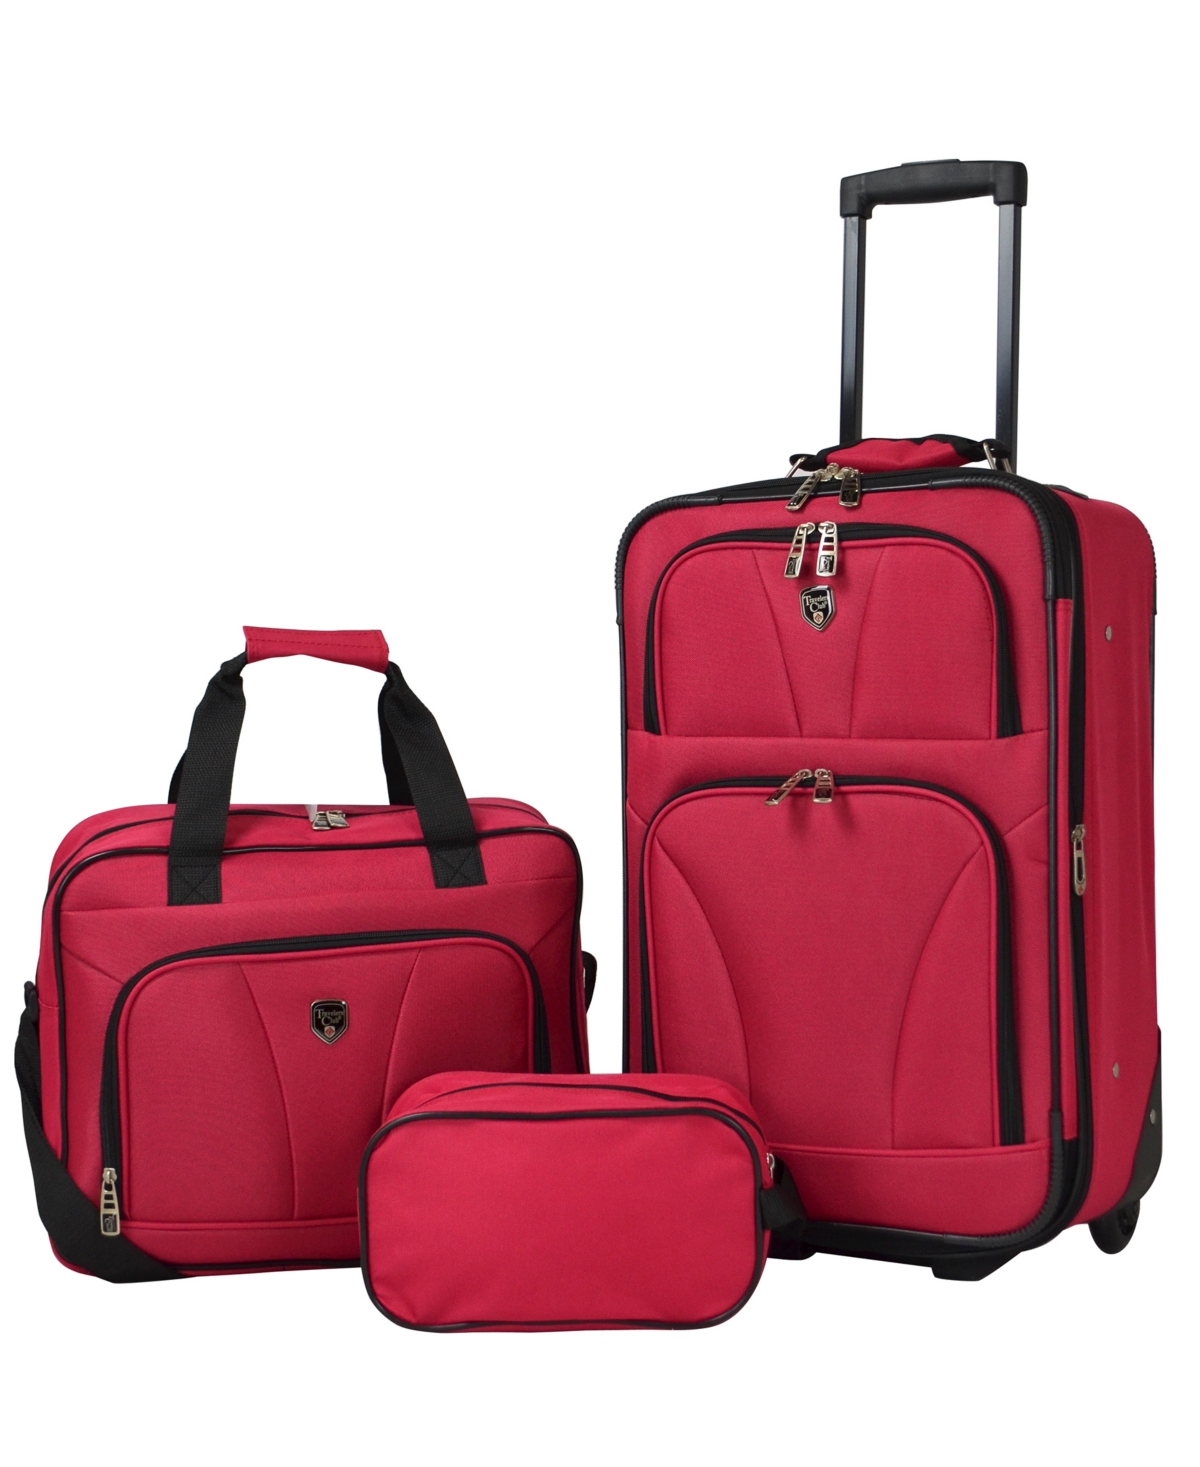 Bowman Eva Expandable Value Luggage and Travel Set, 3 Piece - Red